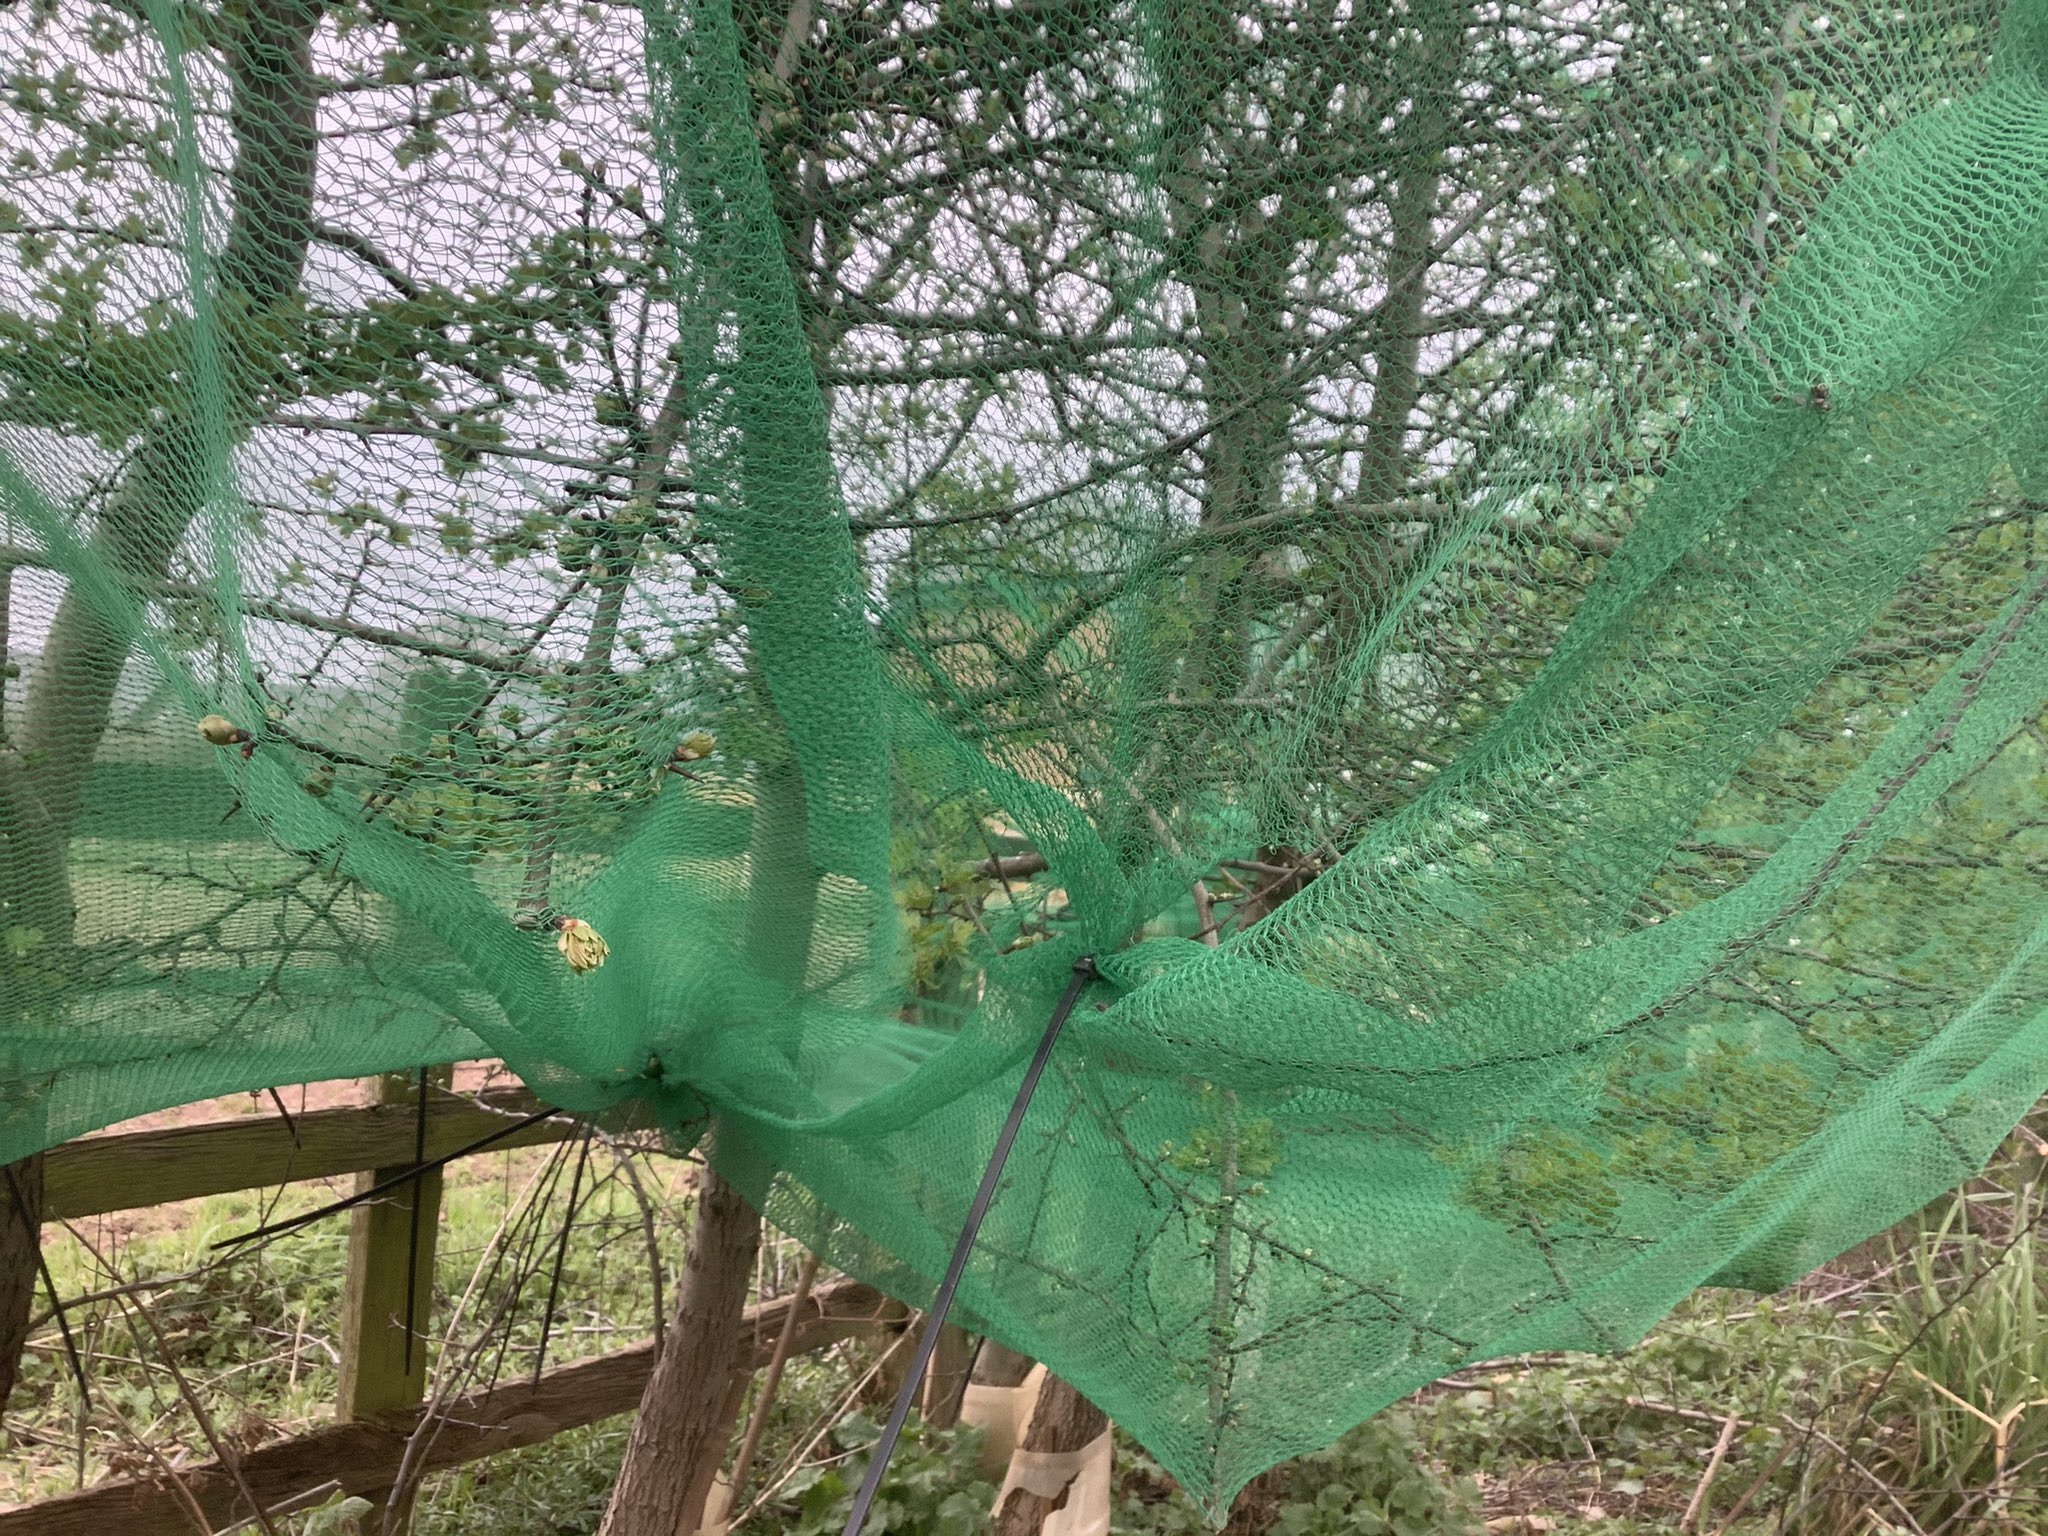 Poorly installed netting